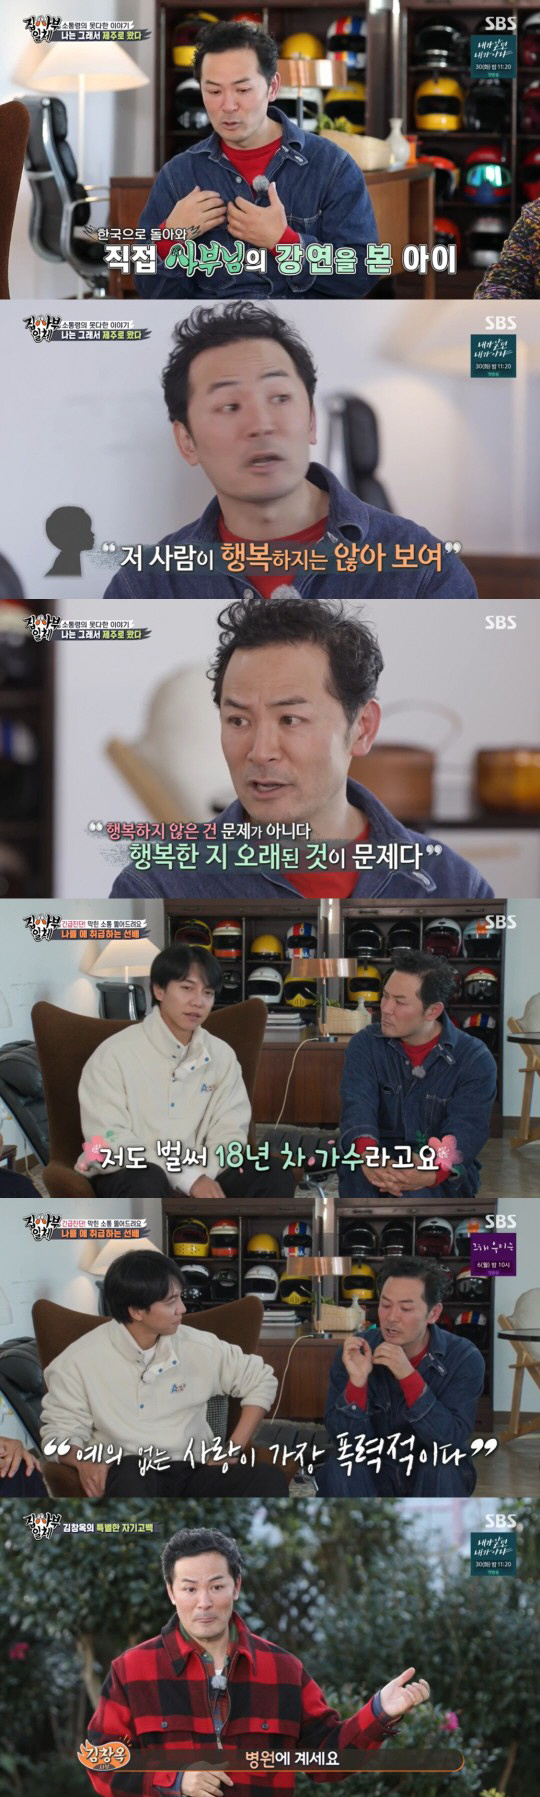 All The Butlers communication expert Kim Chang-ok told the recent stay in Jeju Island.Kim Chang-ok was on the masters side in the SBS entertainment program All The Butlers broadcast on the 28th.Kim Chang-ok greeted the members and surprised everyone by surprise Confessions, saying, I originally worked at Seoul but I came to Jeju Island because I did not want to lecture.Lee Seung-gi asked, Are you retiring? And Kim Chang-ok said, Retirement is a dream. Then, I had a shocking thing.I will go home and tell you, I hope you will be able to empty today rather than fill it. Kim Chang-oks Jeju Island house was located at a glance with a view of Jeju Island, which impressed the members. The wide yard, interior and clean interior were also impressive.Kim Chang-ok recently pulled out an anecdote that shocked him by facing his inner inner circle. After a middle school student saw my lecture, he said, He does not seem to be happy.I was so angry. I was angry because I saw myself. I had no courage to stand in front of the mirror, but he had lighted the mirror and mirror to me.I do not think its a problem that I did not do it, but I thought it was a problem that it was too old. Kim Chang-ok was hard to find a psychiatrist, but he decided to change the pattern of life by getting a message from his alumni saying, When you are gone and When you are hard, you come to Jeju Island.This led to the settlement of Jeju Island. Kim Chang-ok also said, People think that if things go well, there is no problem with the soul.He said he had looked back at his inner late.In a lecture that began in earnest, Kim Chang-ok said, I was not a communicator but a non-communicator. My father has hearing impairment and has never had a smooth conversation.My father and I did not speak, so I communicated with him. My father worked on a stone wall in Jeju Island, and when he came in drunk, he would argue with his mother.Kim Chang-ok said, My father was a scary being, but the relationship got better. I was working at Seoul.It was a dentist in Jeju Island, asking if I could pay for my fathers implants and neurotherapy, but suddenly my father asked me to change the phone.I was so nervous that I had never spoken to my father before. My father said, Are you a fool? Its my father. Im sorry.My father said he was sorry, so it was cool. I did not feel like this, and now I thought that you were powerless. Kim Chang-ok said, On the day I saw me, I looked at my fathers Model, Back View, and my left shoulder was tilted and I walked slowly.Two more seconds, I thought Id tear up, so I turned and went away. I thought my father was an old man.When I saw someones Model, Back View, I thought that love started. He also said that his father had been hearing the sound in 70 years after installing artificial cochlear implants last year, but his health condition has deteriorated recently.Kim Chang-ok said, My father is doing tomorrow. I feel like I can send him to you because my father has been getting better since he said Im sorry.The first thing to treat the pain is that I am sorry. If you think of someone who is sorry when you hear this, apologize someday. Kim Dong-Hyun said, I am not good at expressing my father, but when I raised and raised a child, I had such feelings about my father.I think that when I was a child, I sacrificed everything and raised it. Lee Seung-gi, who listened to it, also wiped away tears.Kim Chang-ok said in his last letter to his father, I have been understanding my fathers time for many families for a long time, about 50 years old.I will take good care of my mother and live well. 